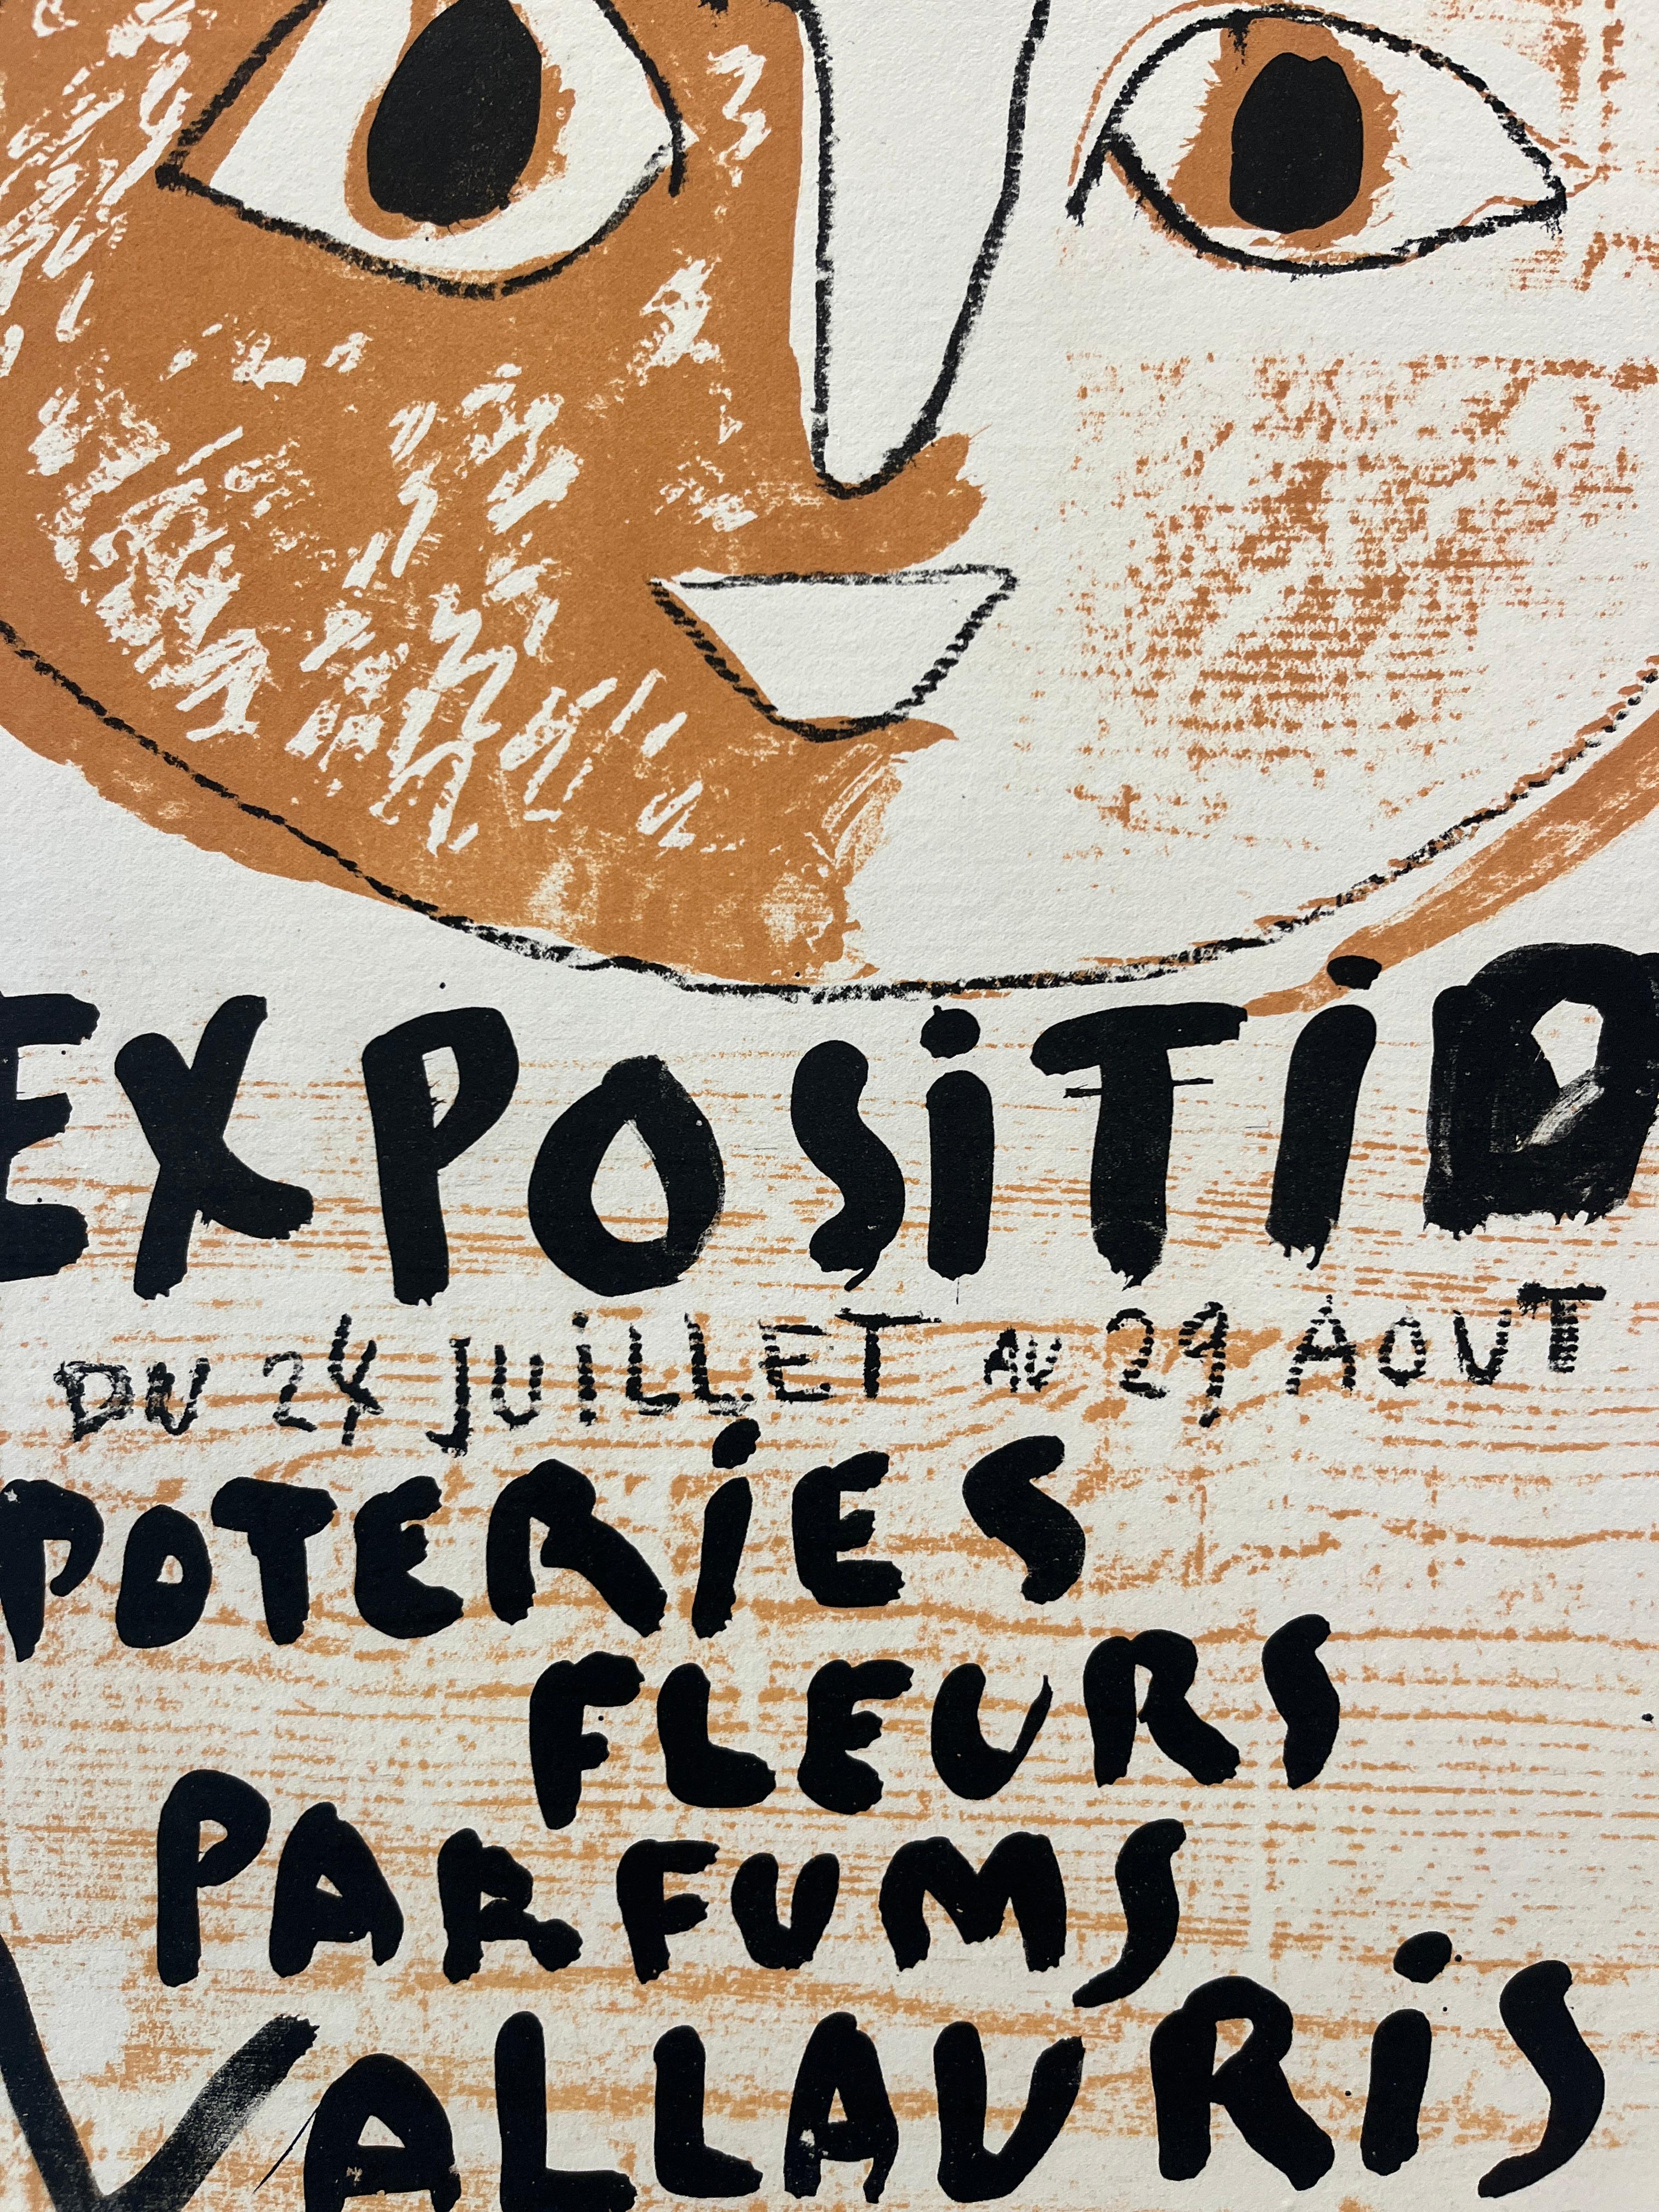 French Picasso Exposition Poteries Fleurs Parfums (NO. 3) Original Vintage Poster, 1948